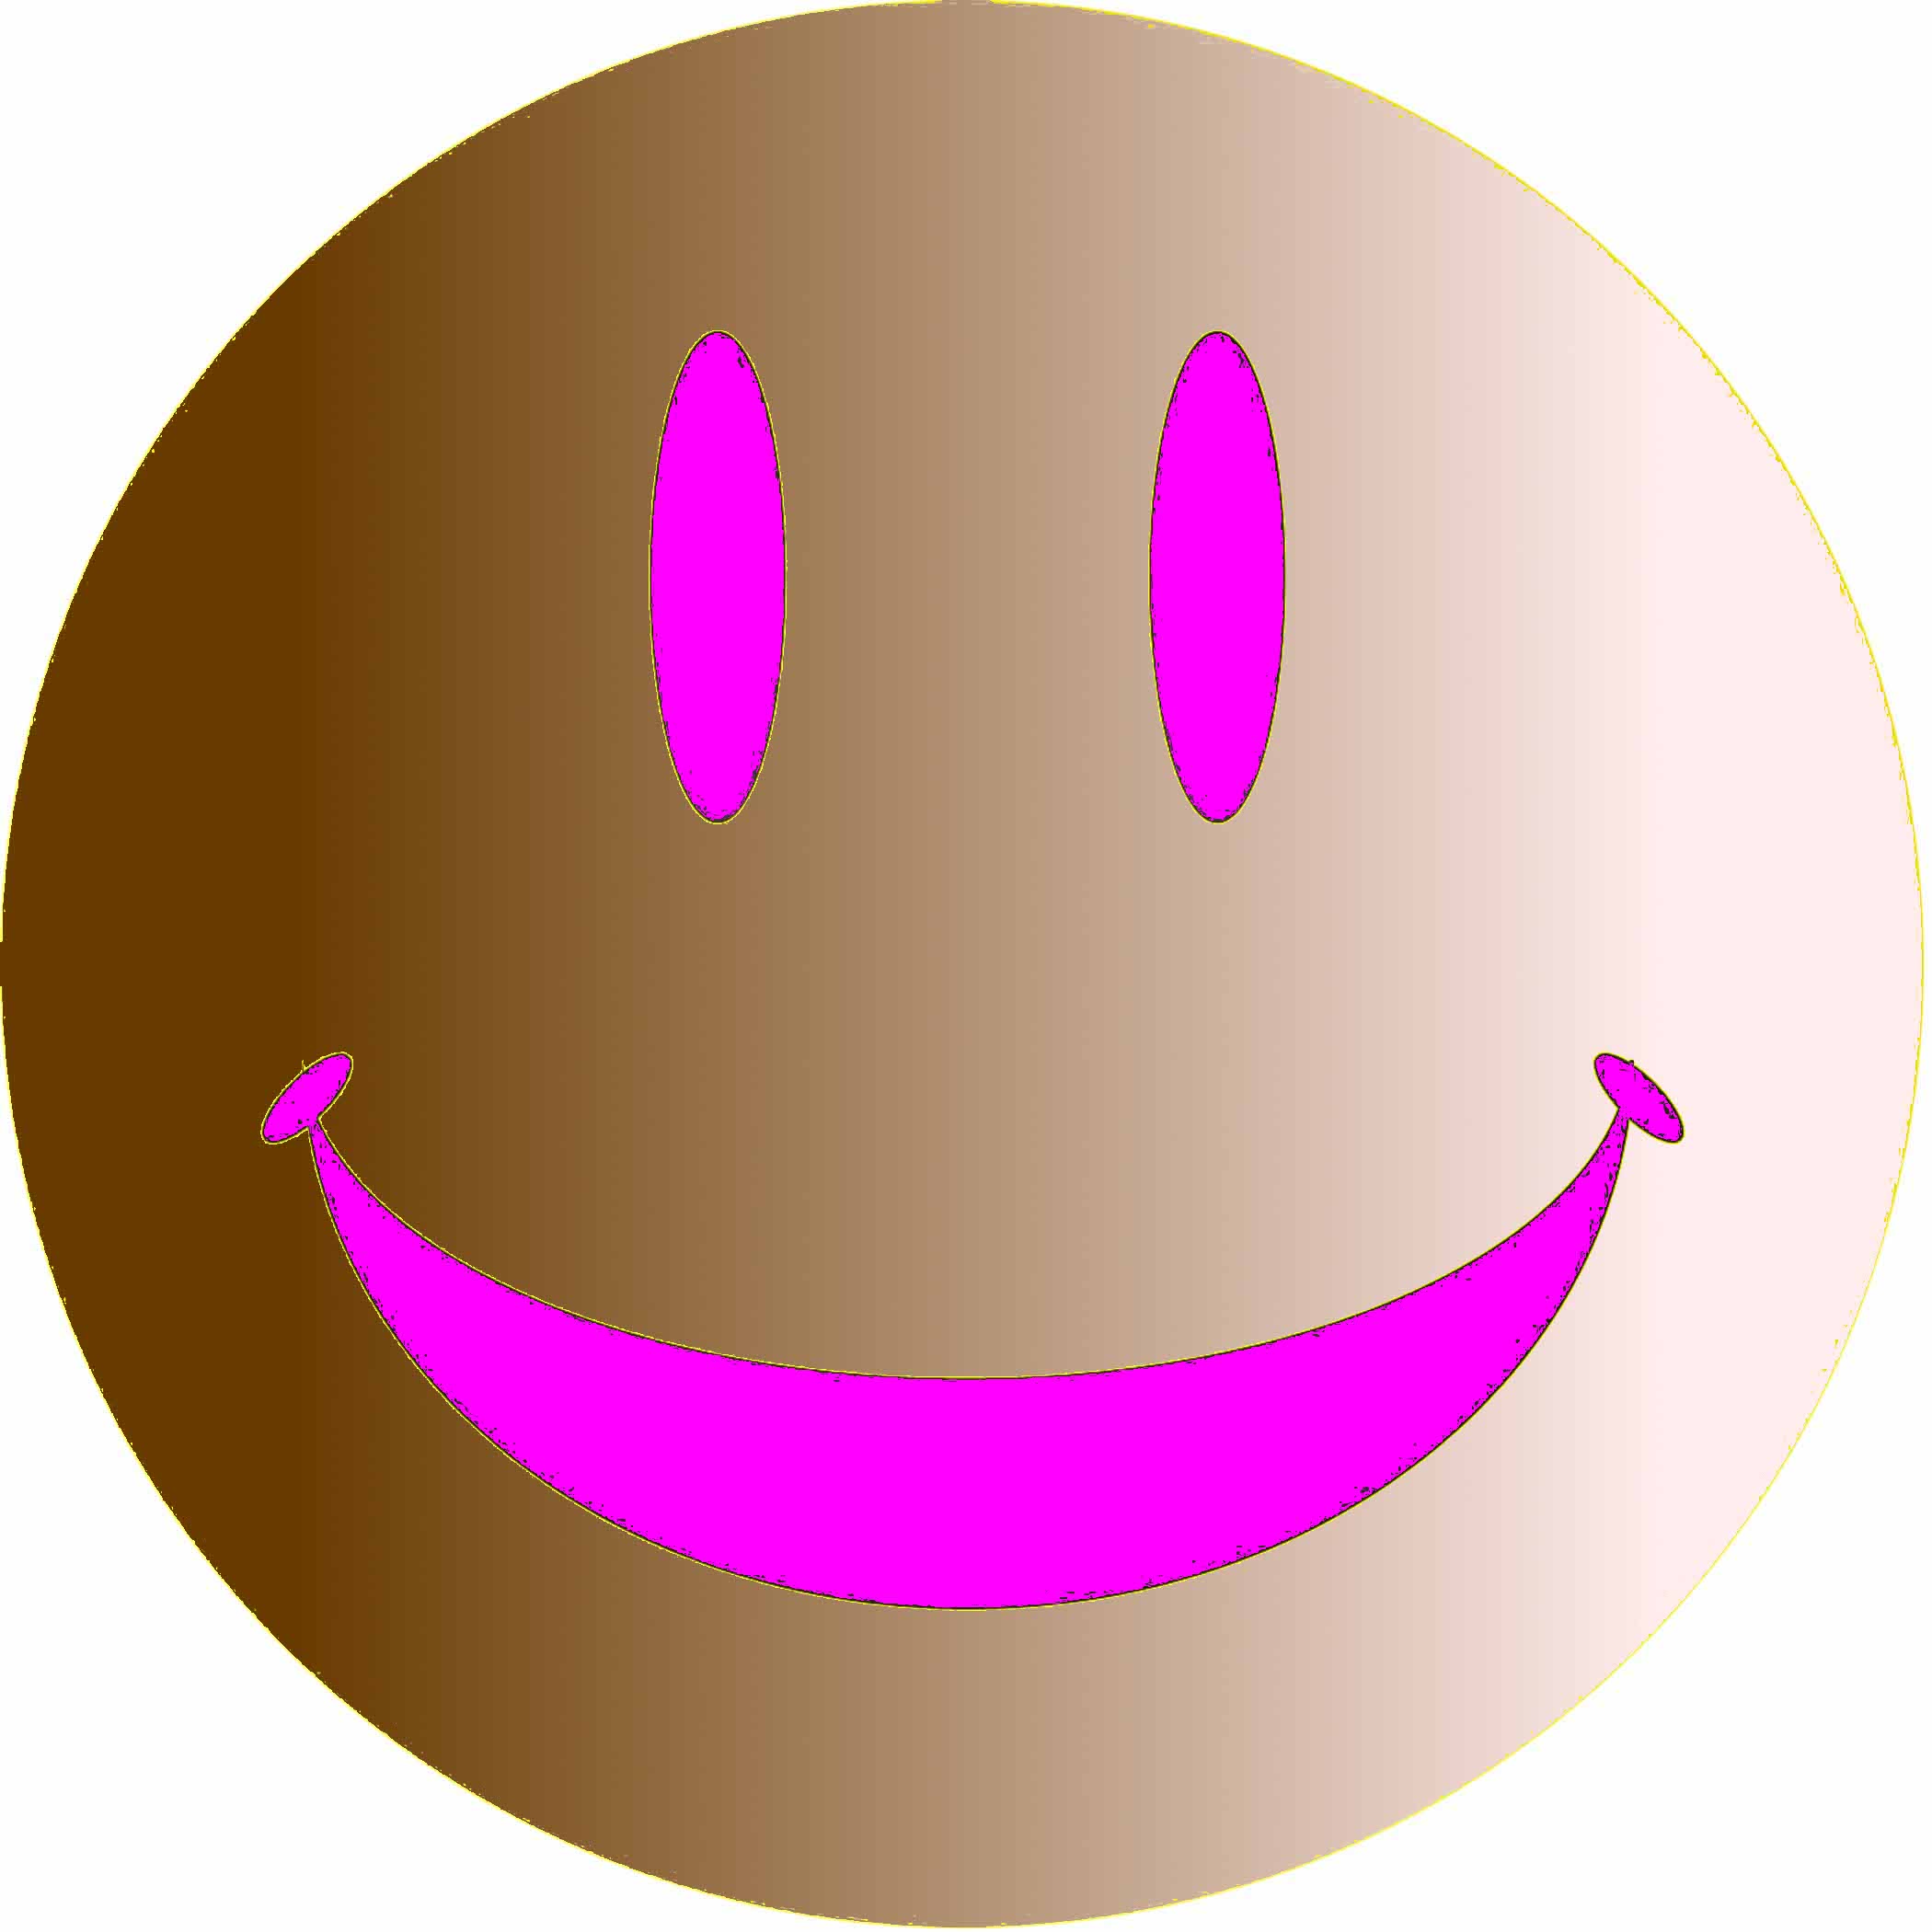 Images For > Singing Smiley Face